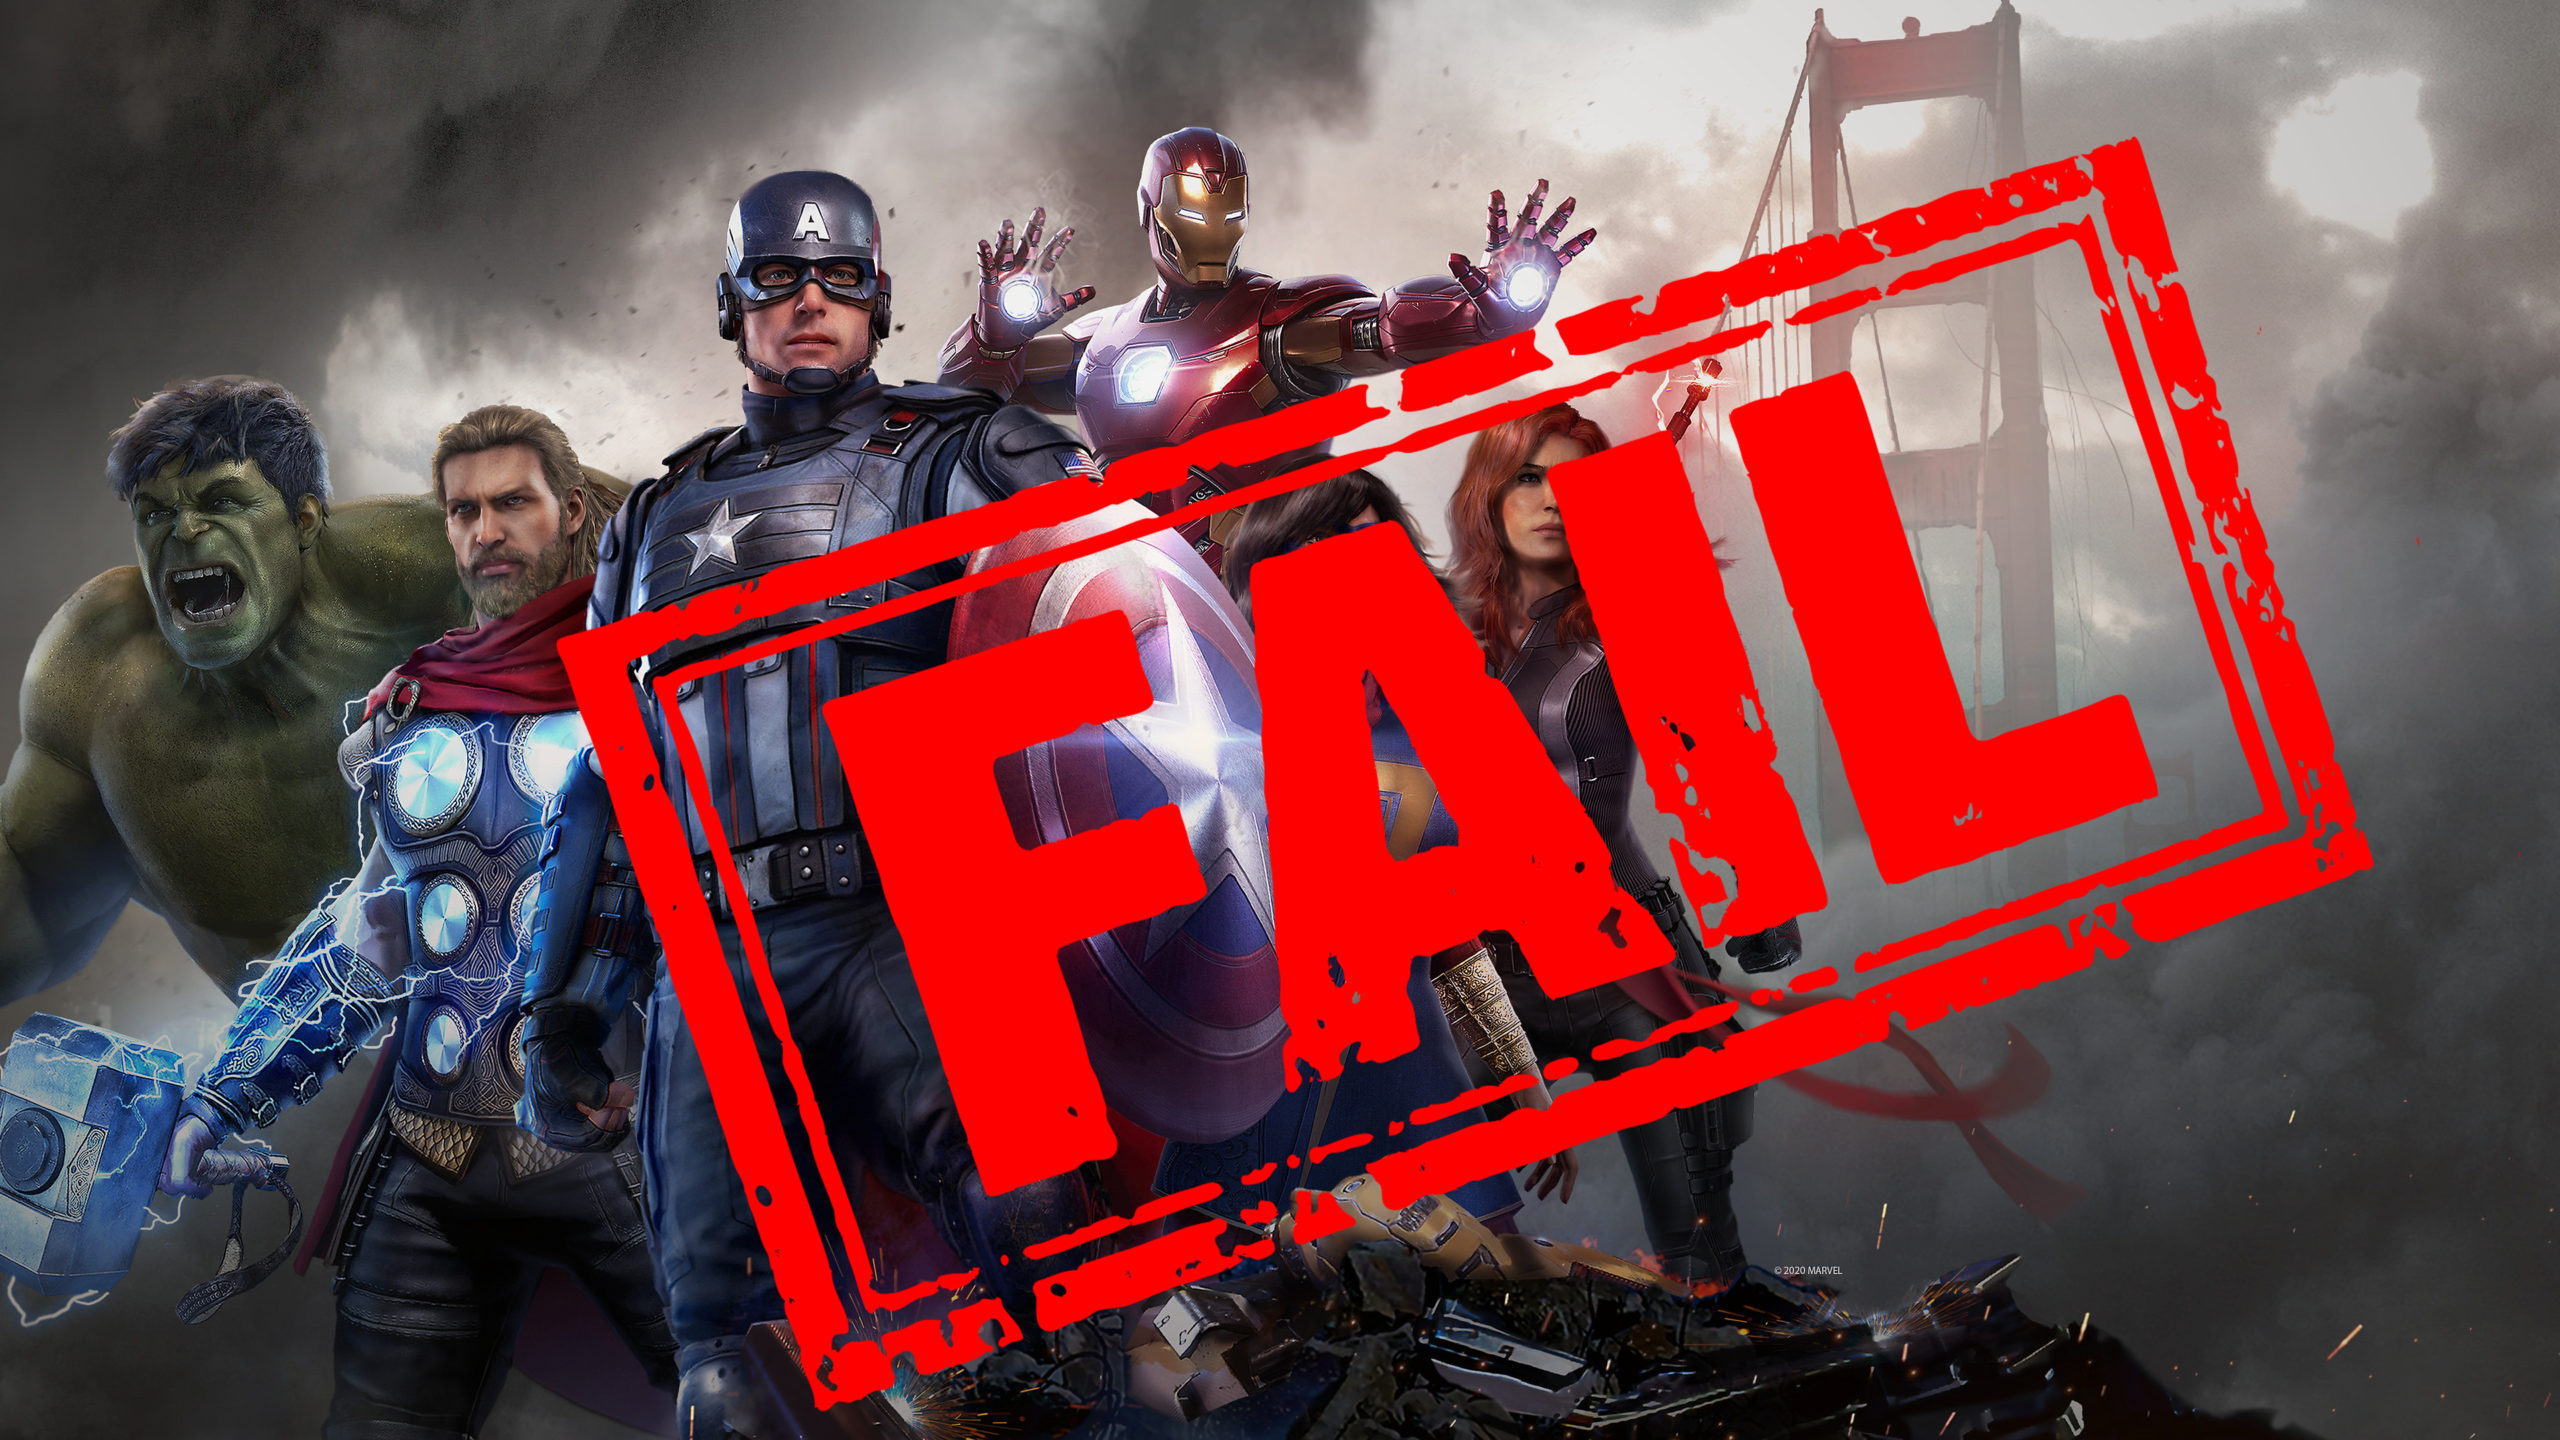 It Is Safe To Say Square Enix ‘Marvel’s Avengers’ Is A Failure